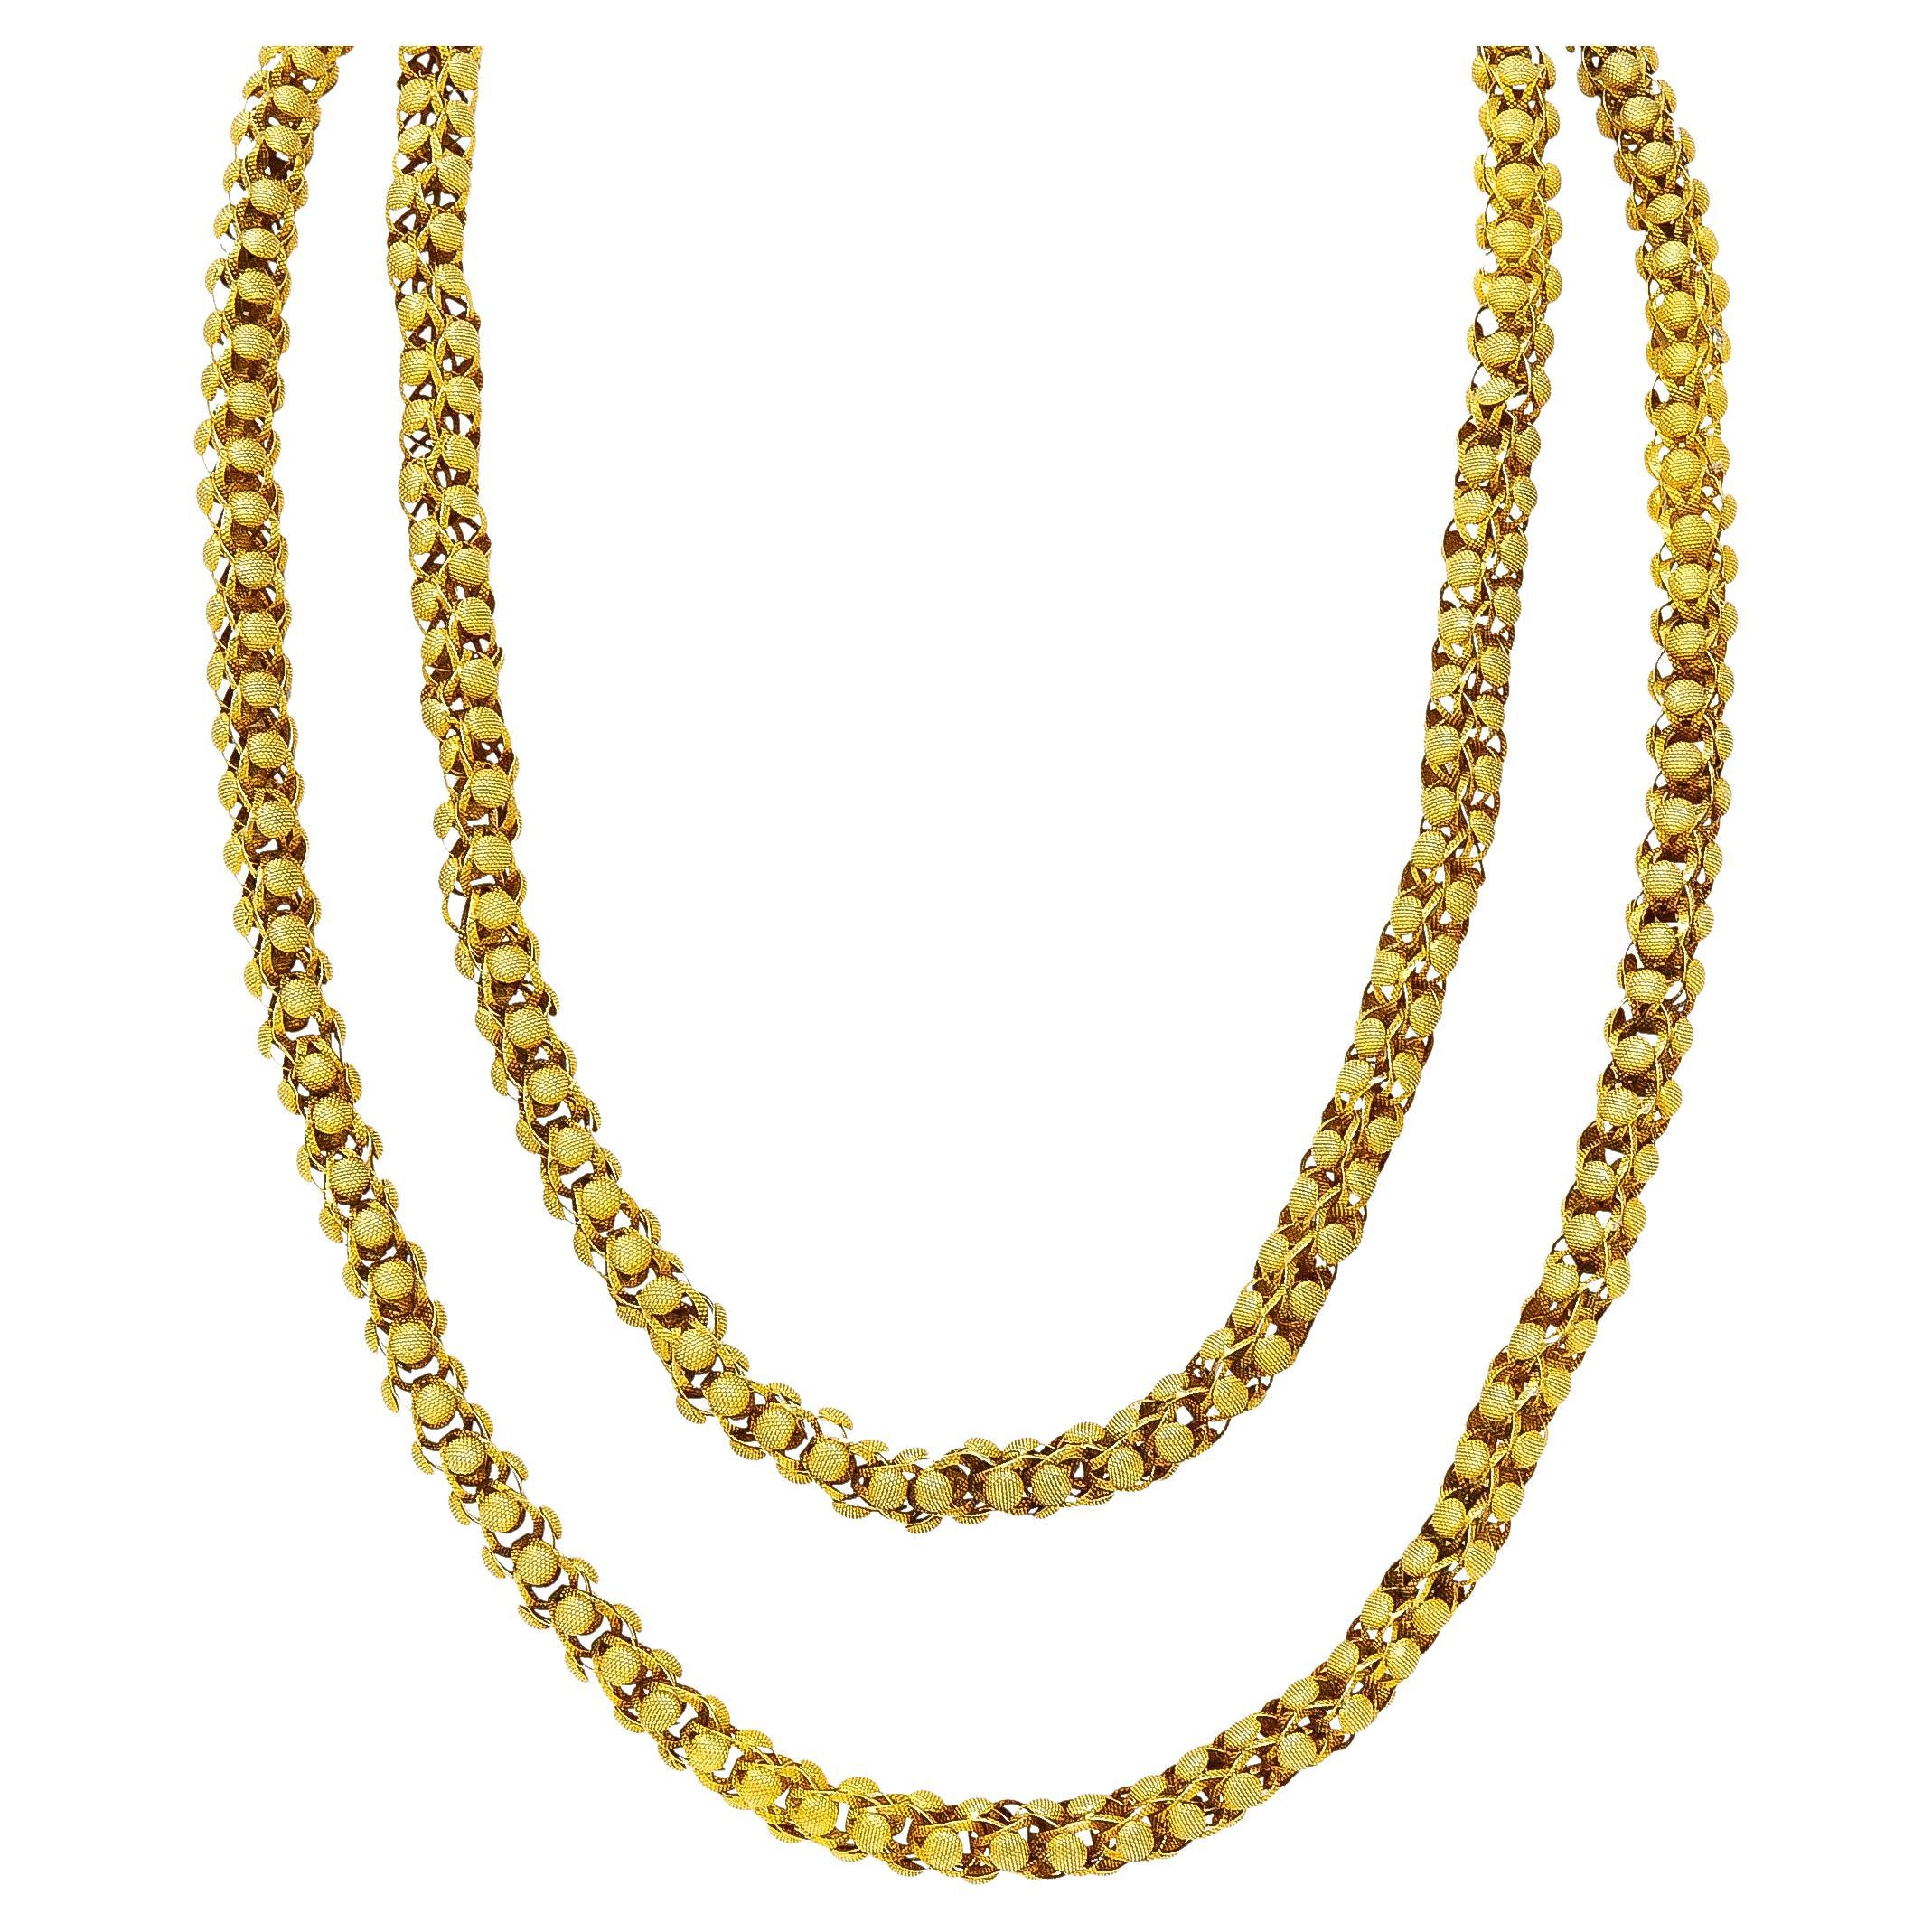 Georgian 18 Karat Yellow Gold Floral Dome Byzantine 46 Inch Long Chain Necklace